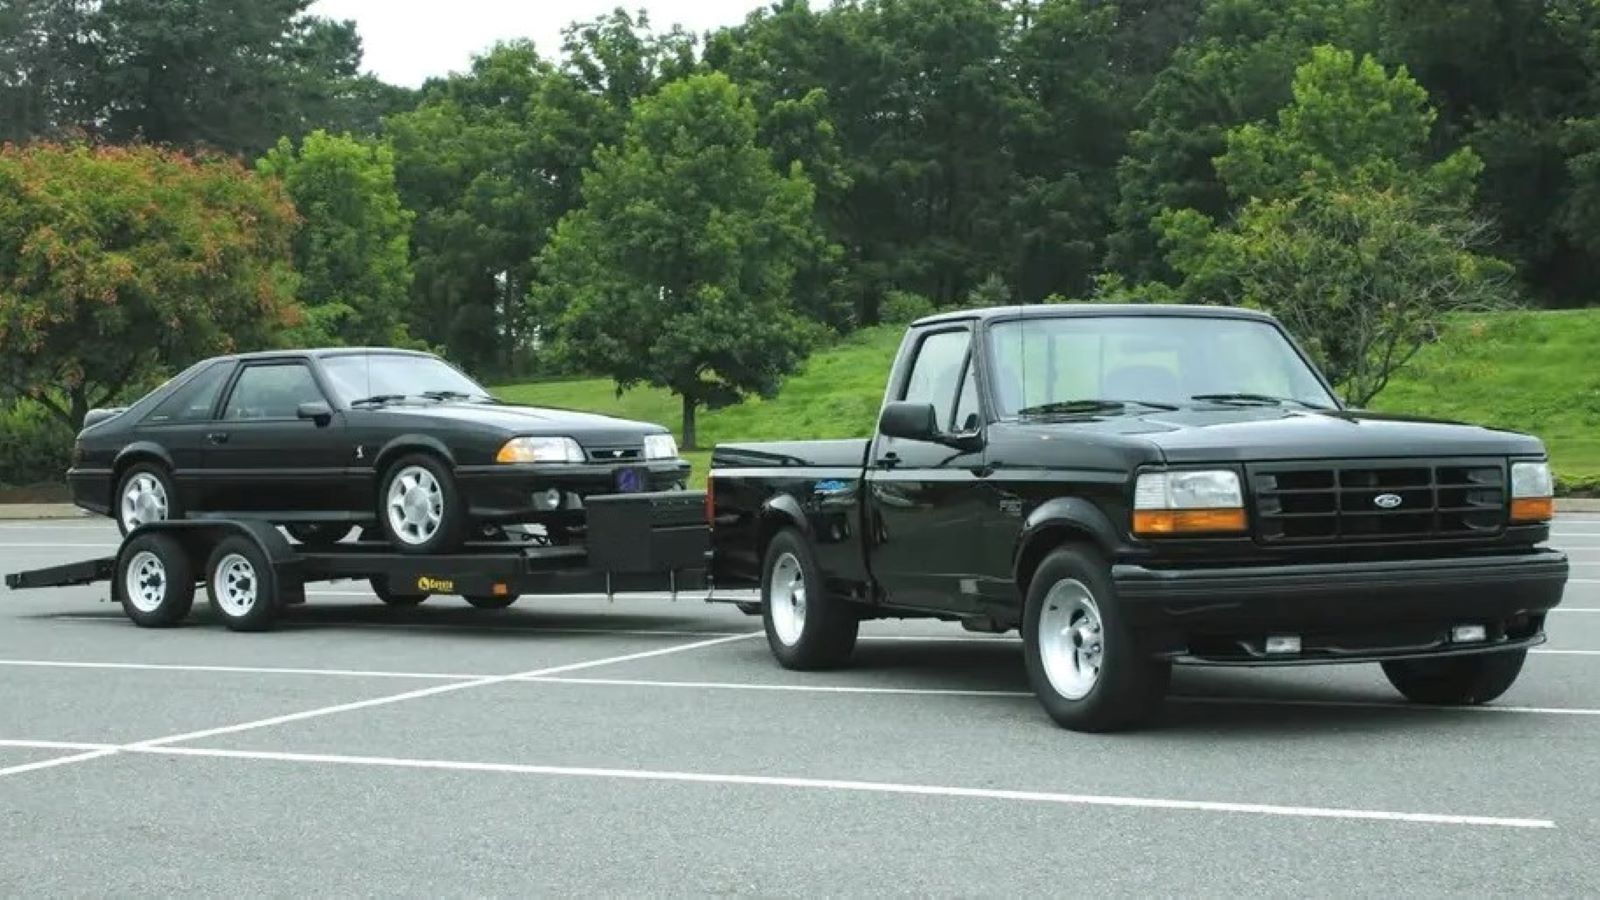 Differences Between First-Gen Ford Lightning and F-150